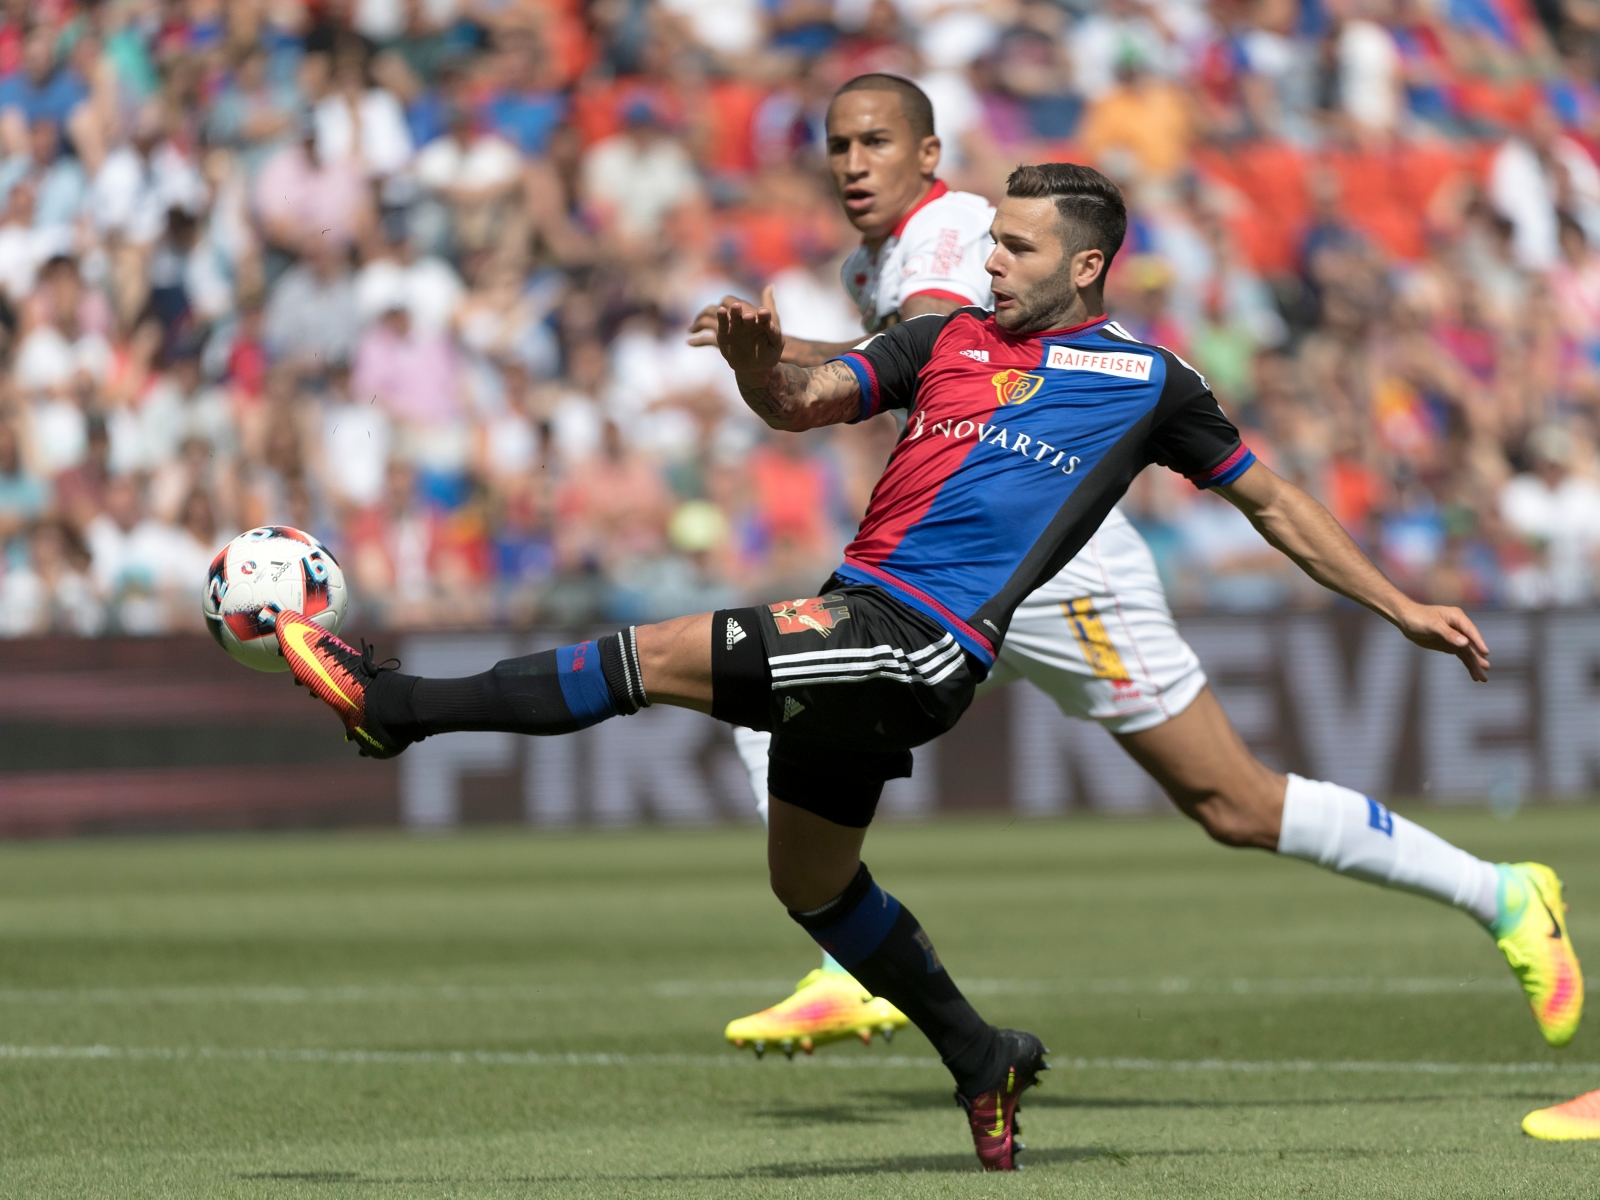 Basel's Renato Steffen, front, and Sion's Leo Lacroix, back, in action during a Super League match between FC Basel 1893 and FC Sion, at the St. Jakob-Park stadium in Basel, Switzerland, on Sunday, July 24, 2016. (KEYSTONE/Georgios Kefalas) SWITZERLAND SOCCER BASEL SION